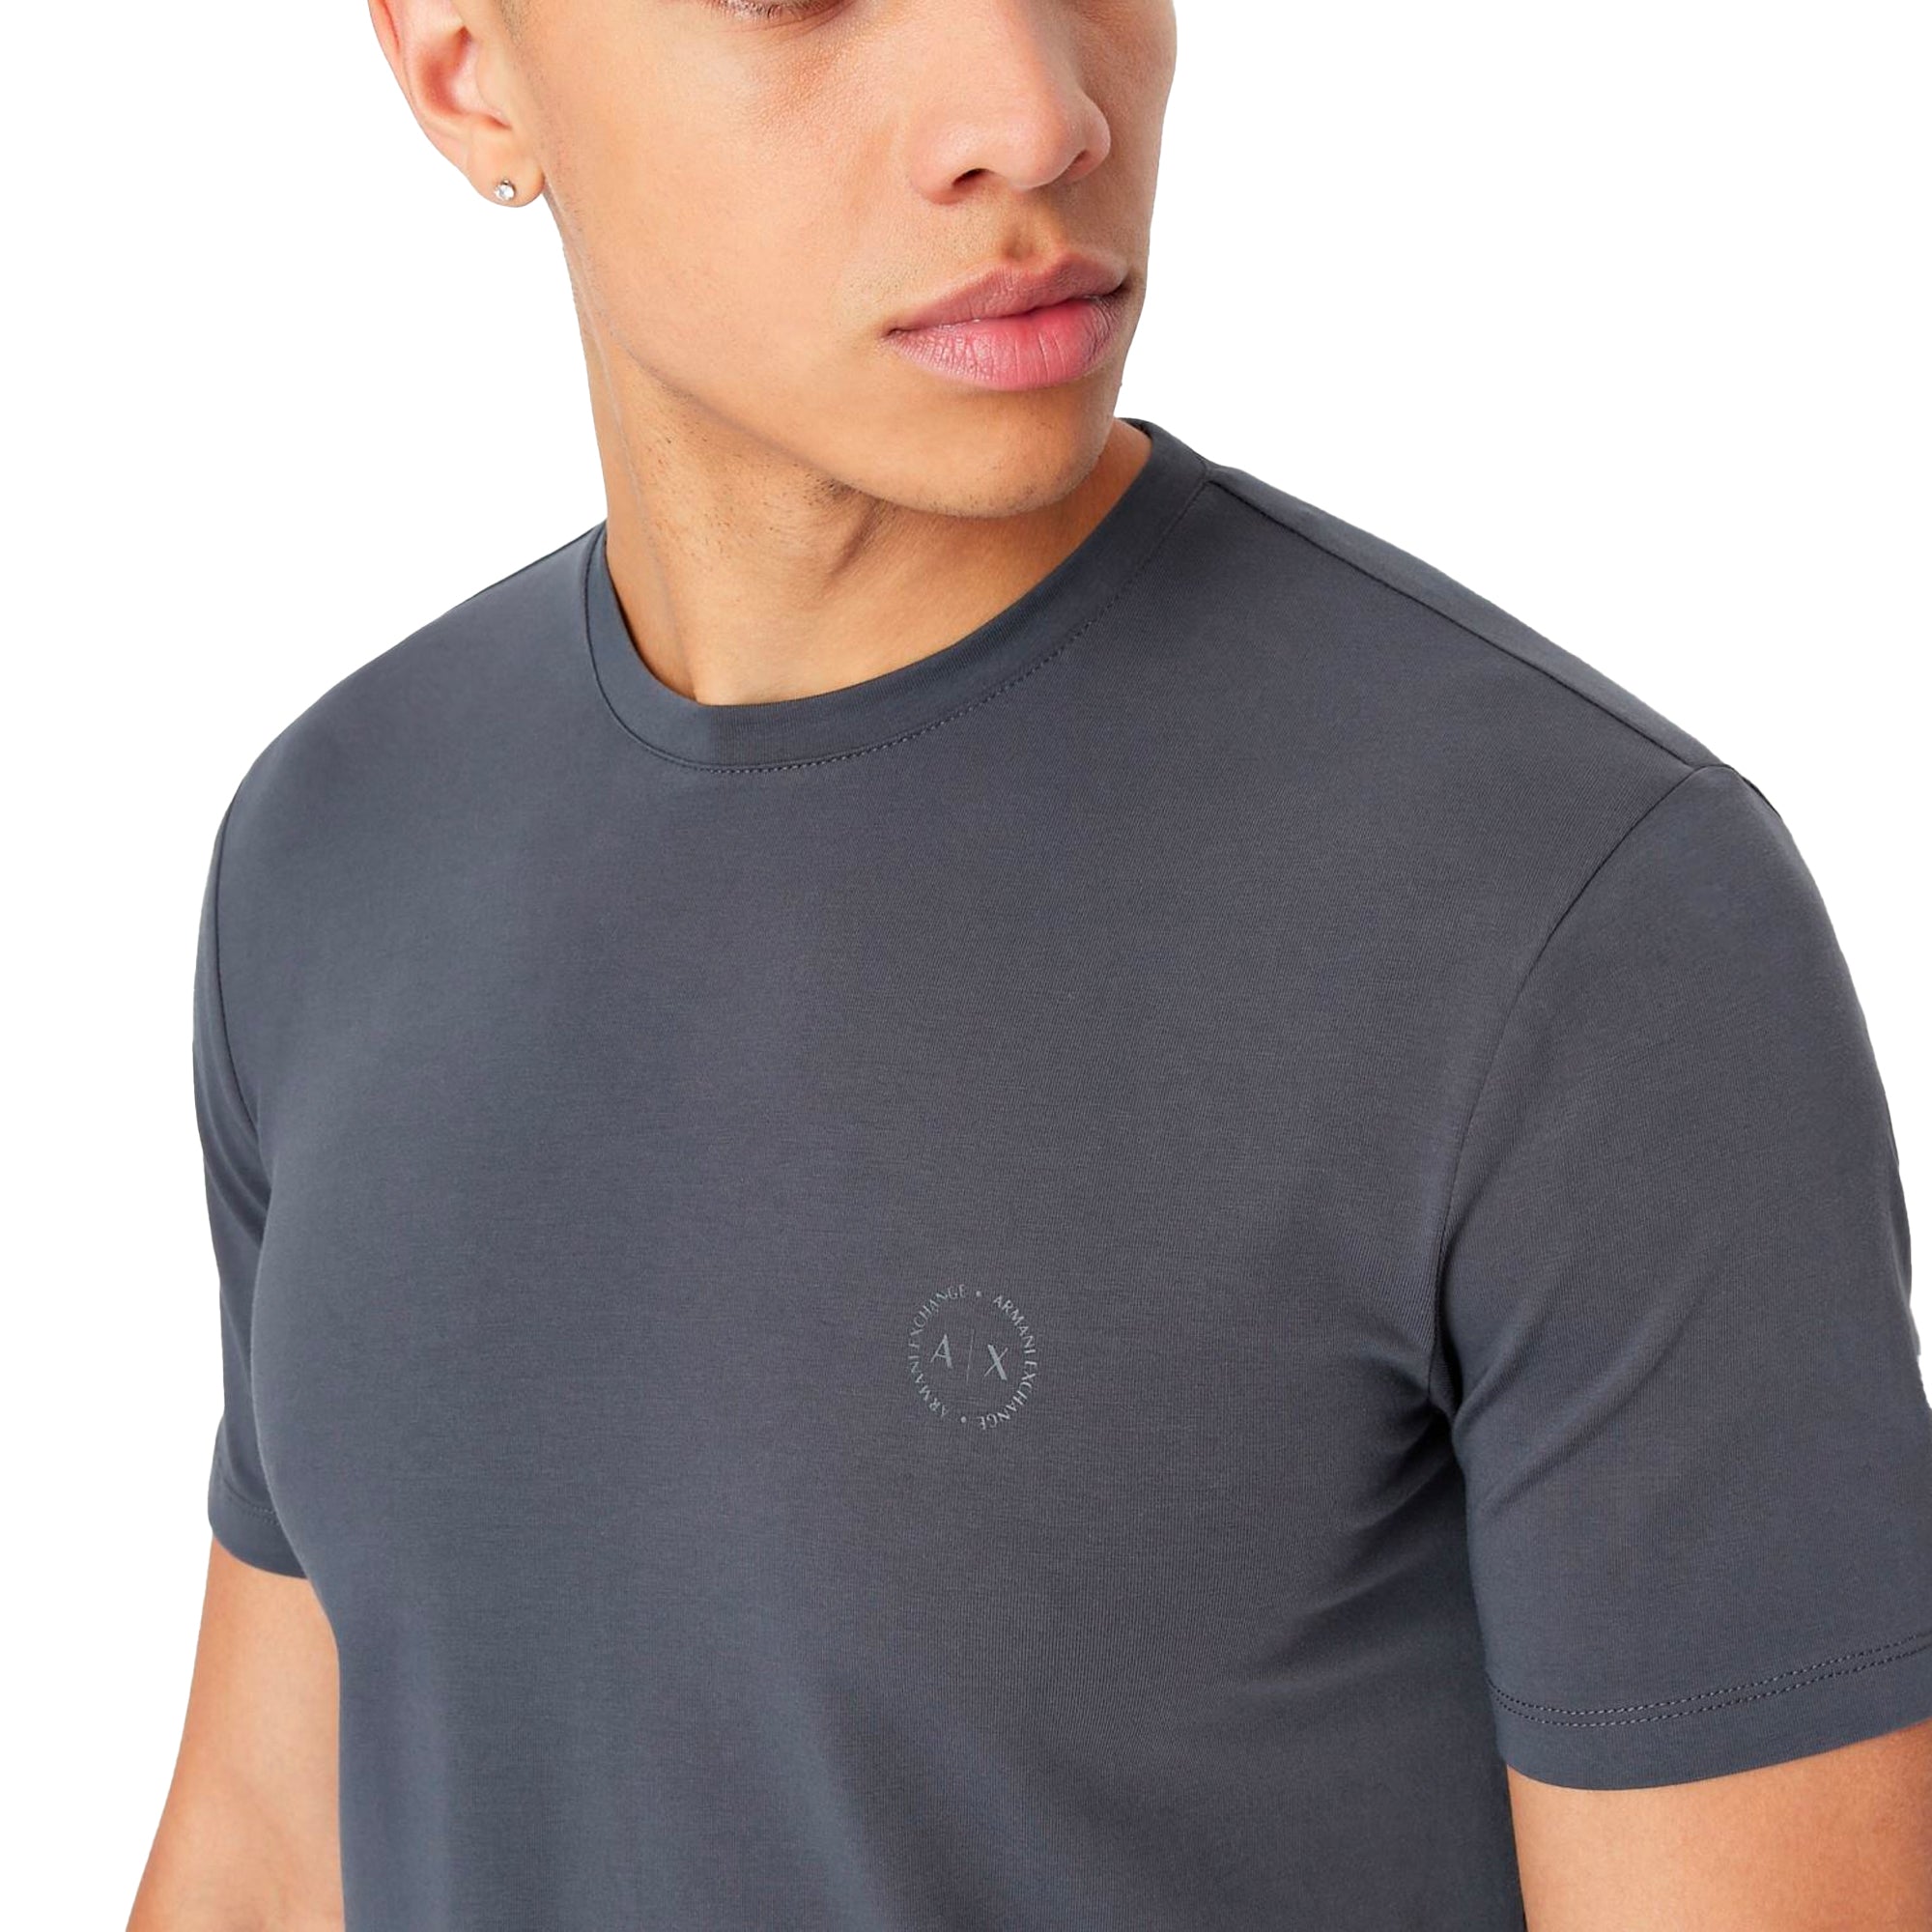 Armani Exchange Small Chest Logo Stretch T-Shirt - Charcoal Blue